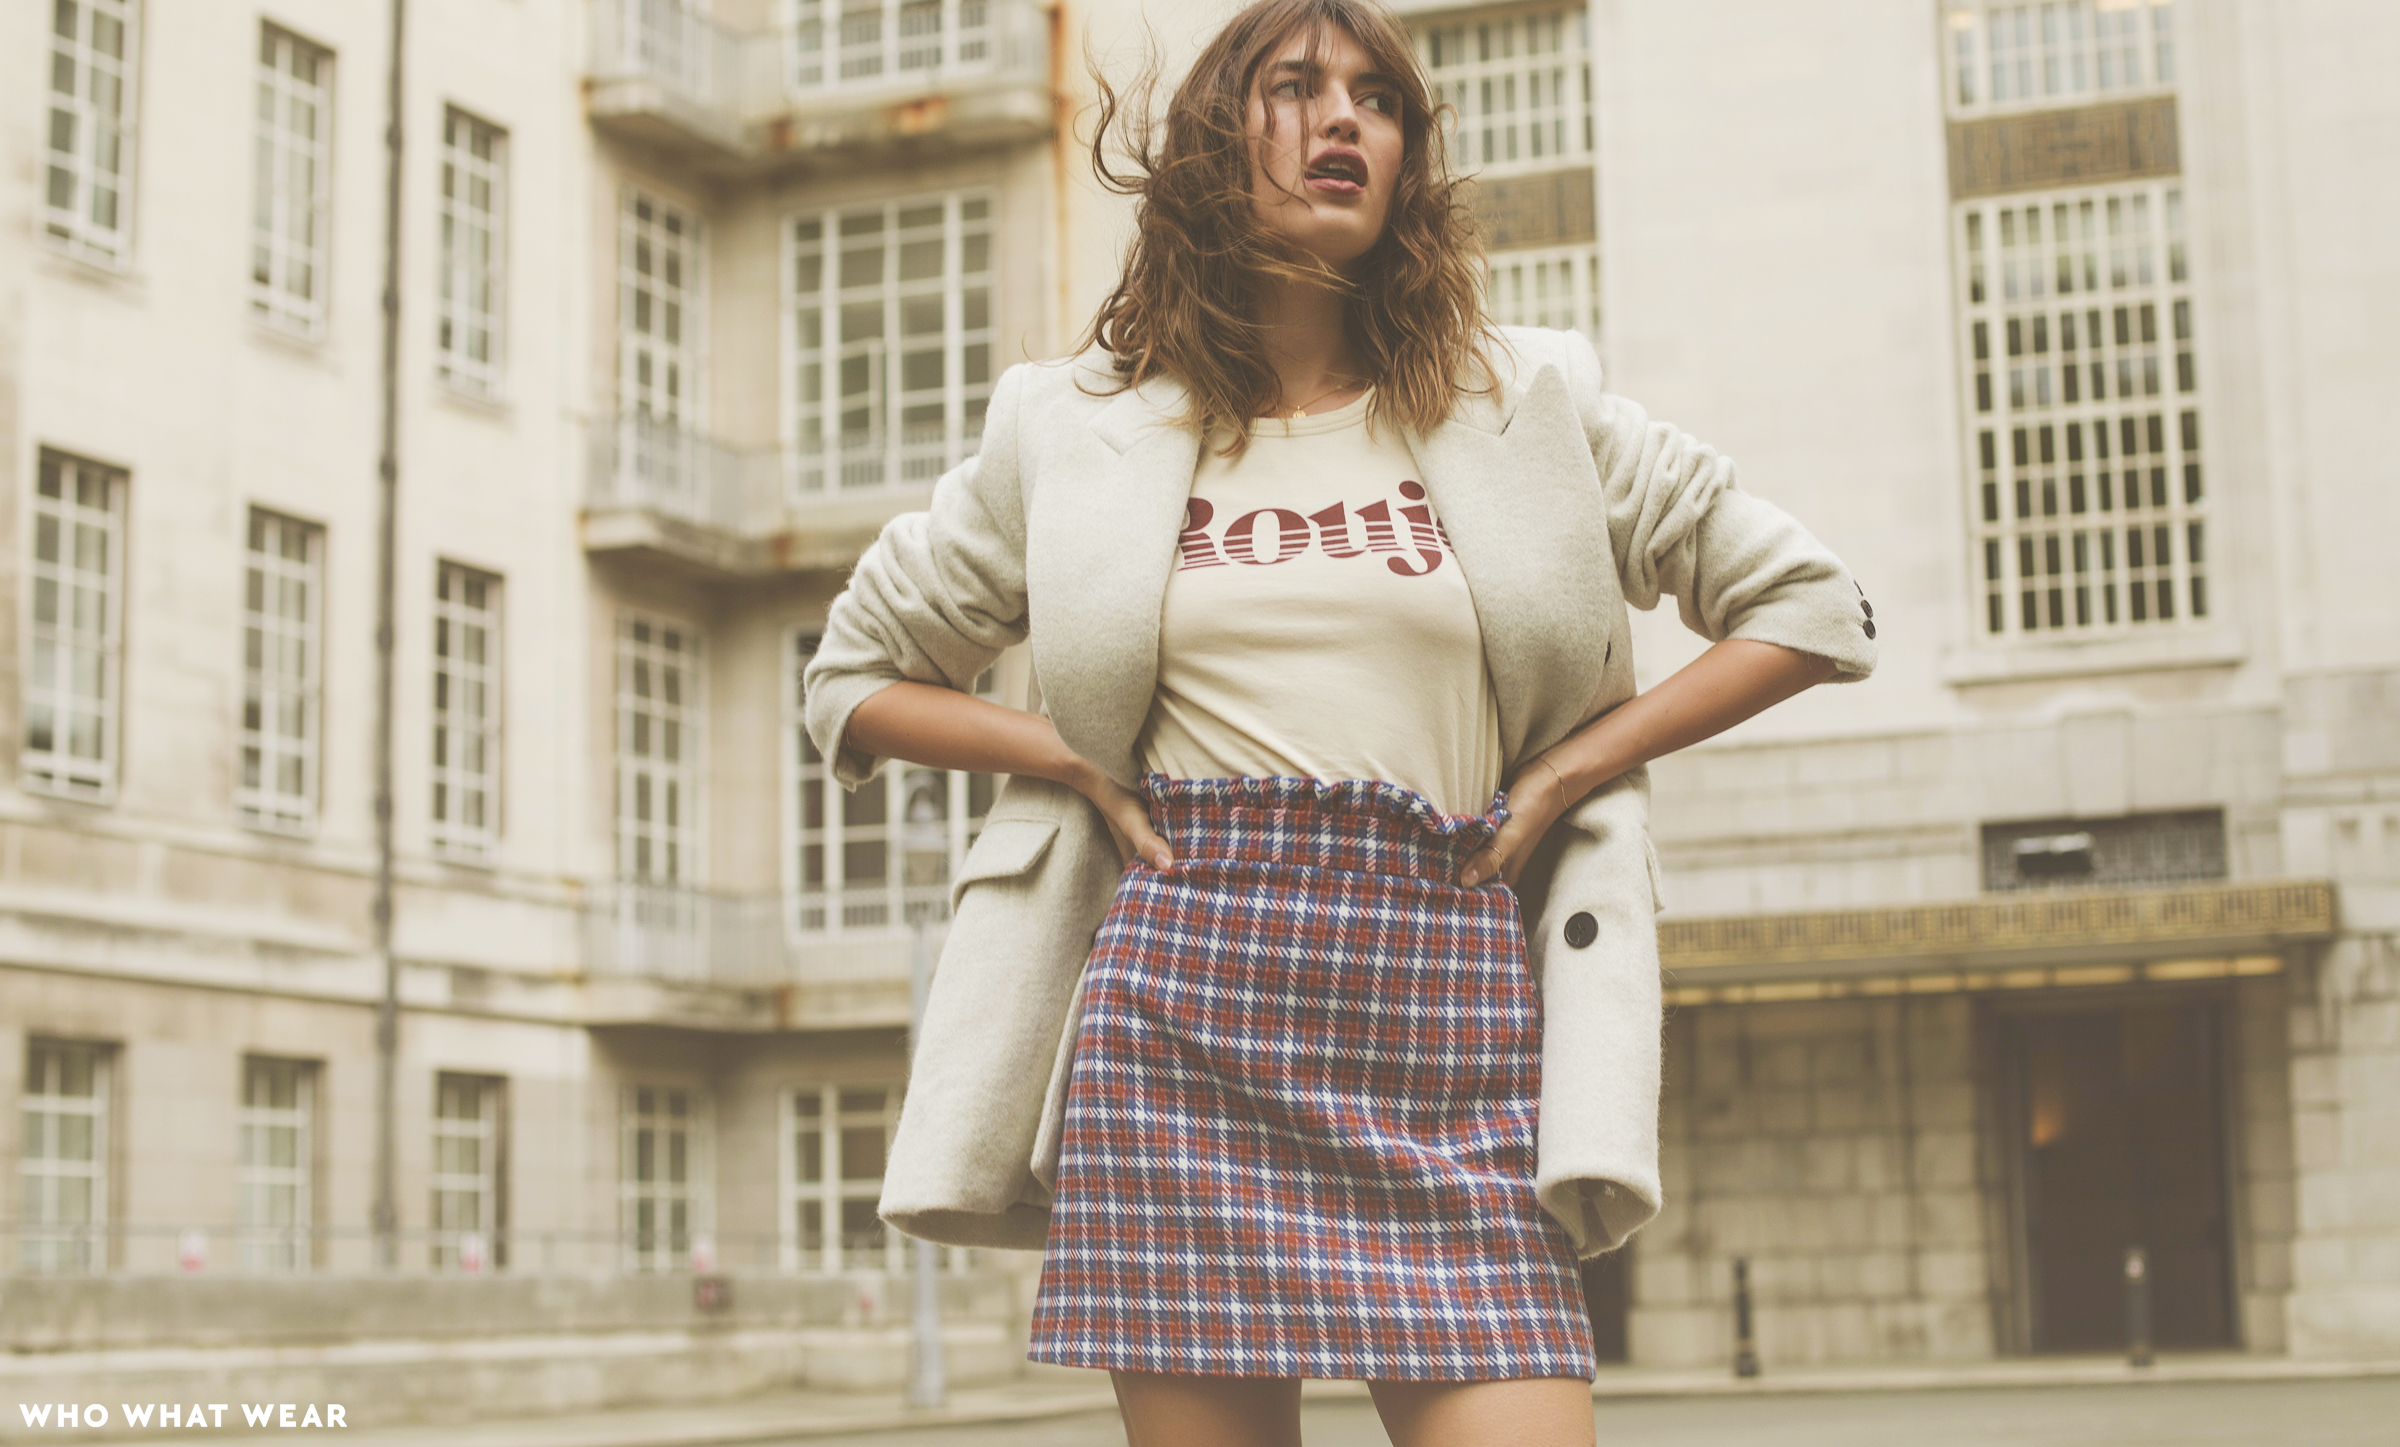 Jeanne Damas on French Style and Her Brand, Rouje | Who What Wear